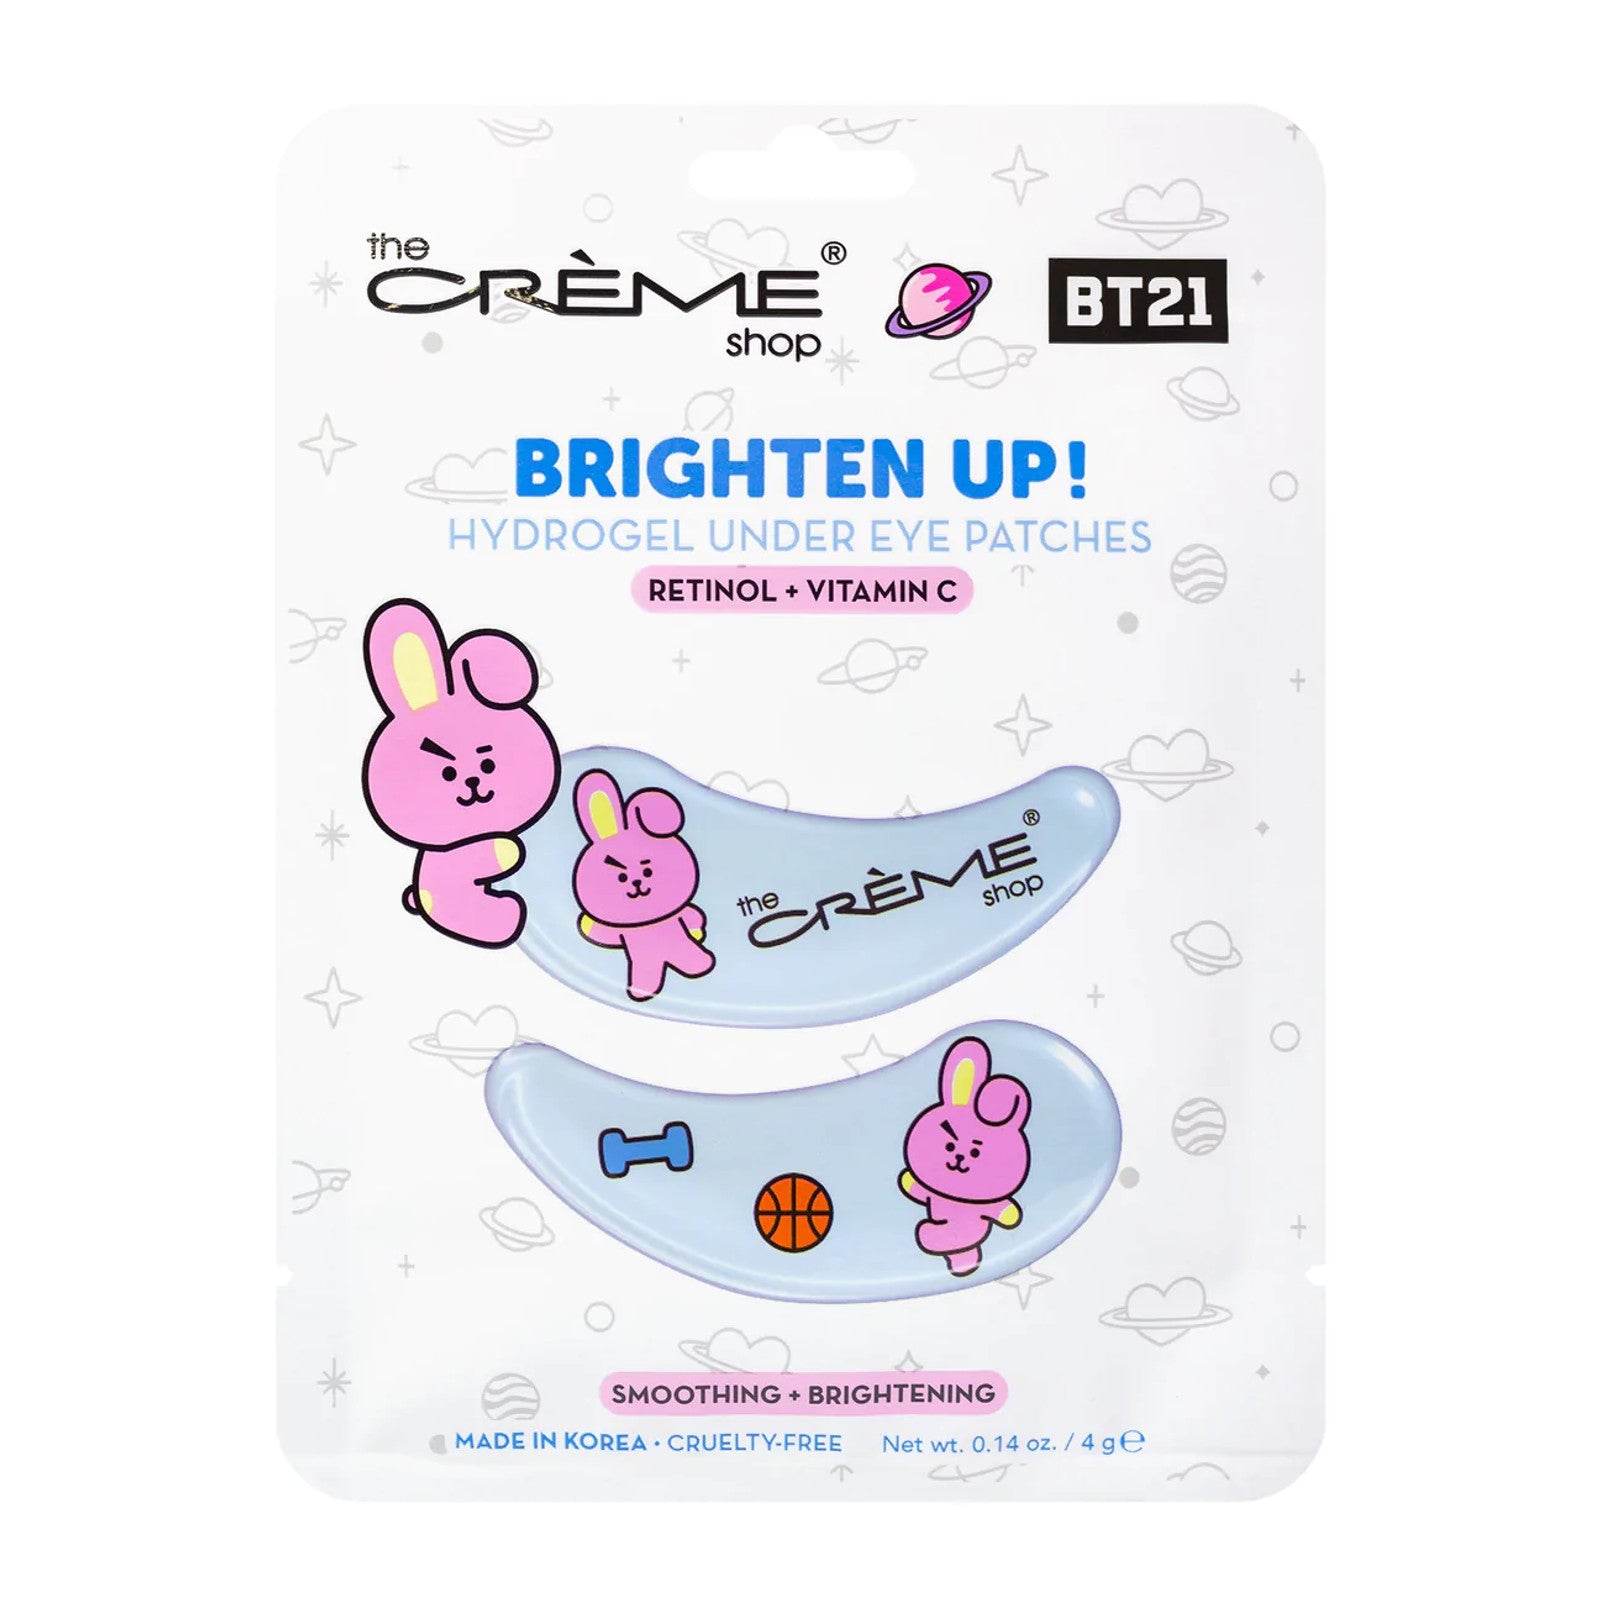 BT21 Brighten Up COOKY Hydrogel Under Eye Patches Beauty The Creme Shop   